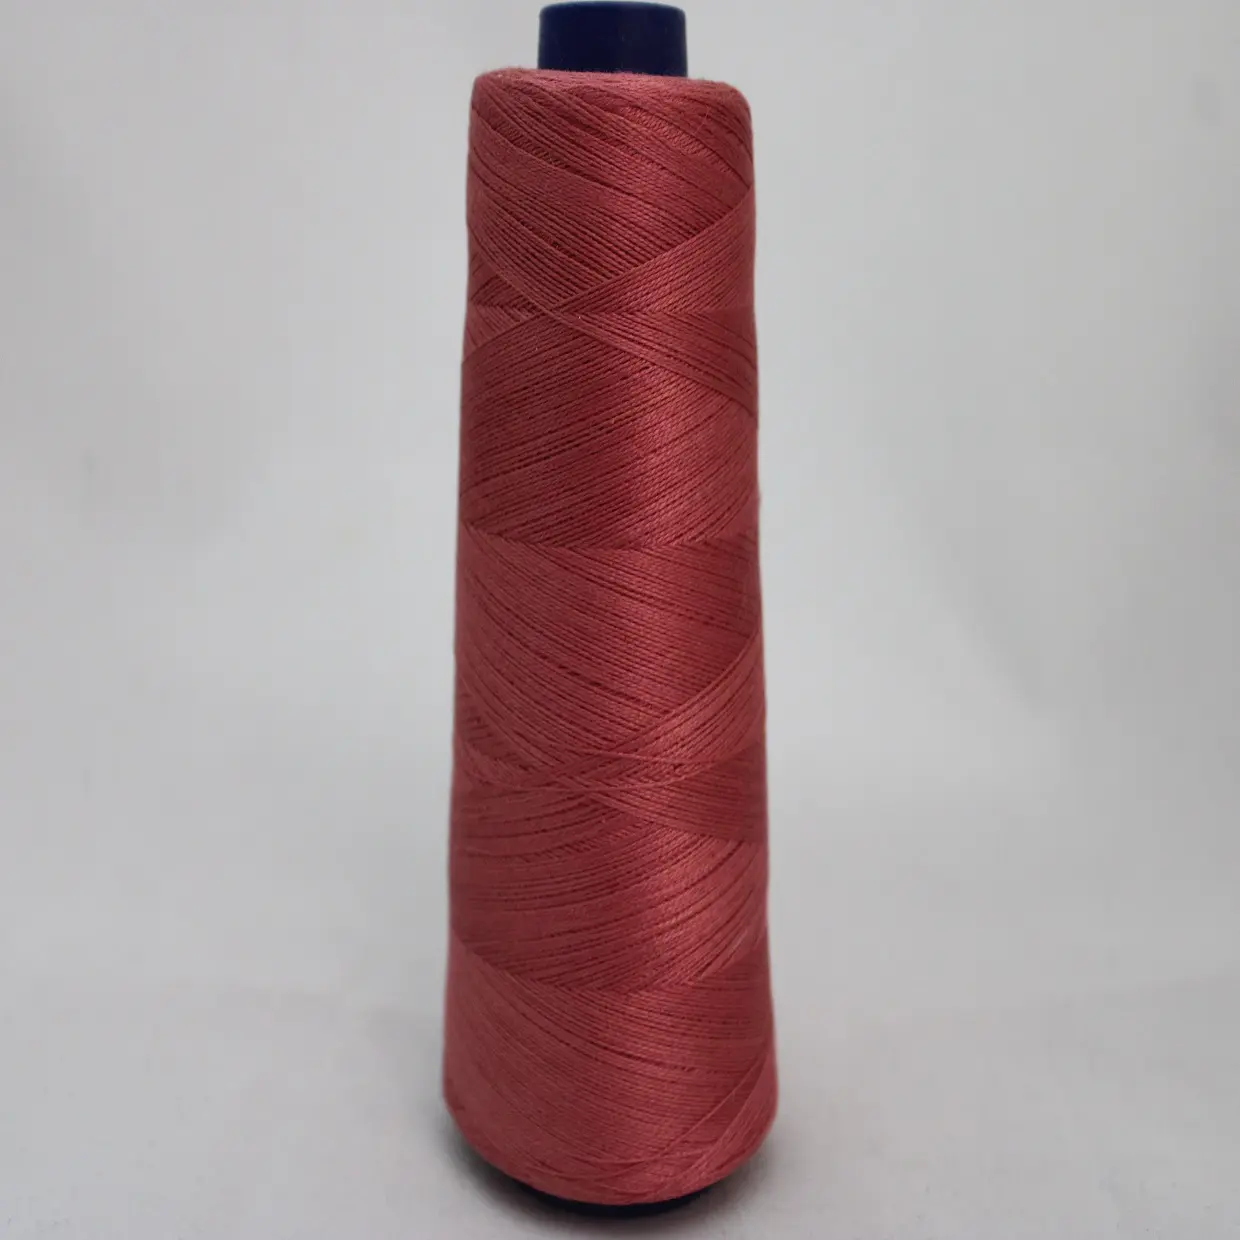 custom made lace weight 100% mulberry silk yarn in dark Pink cones of 1500 meter yardage on cones of 50 Gram for embroidery